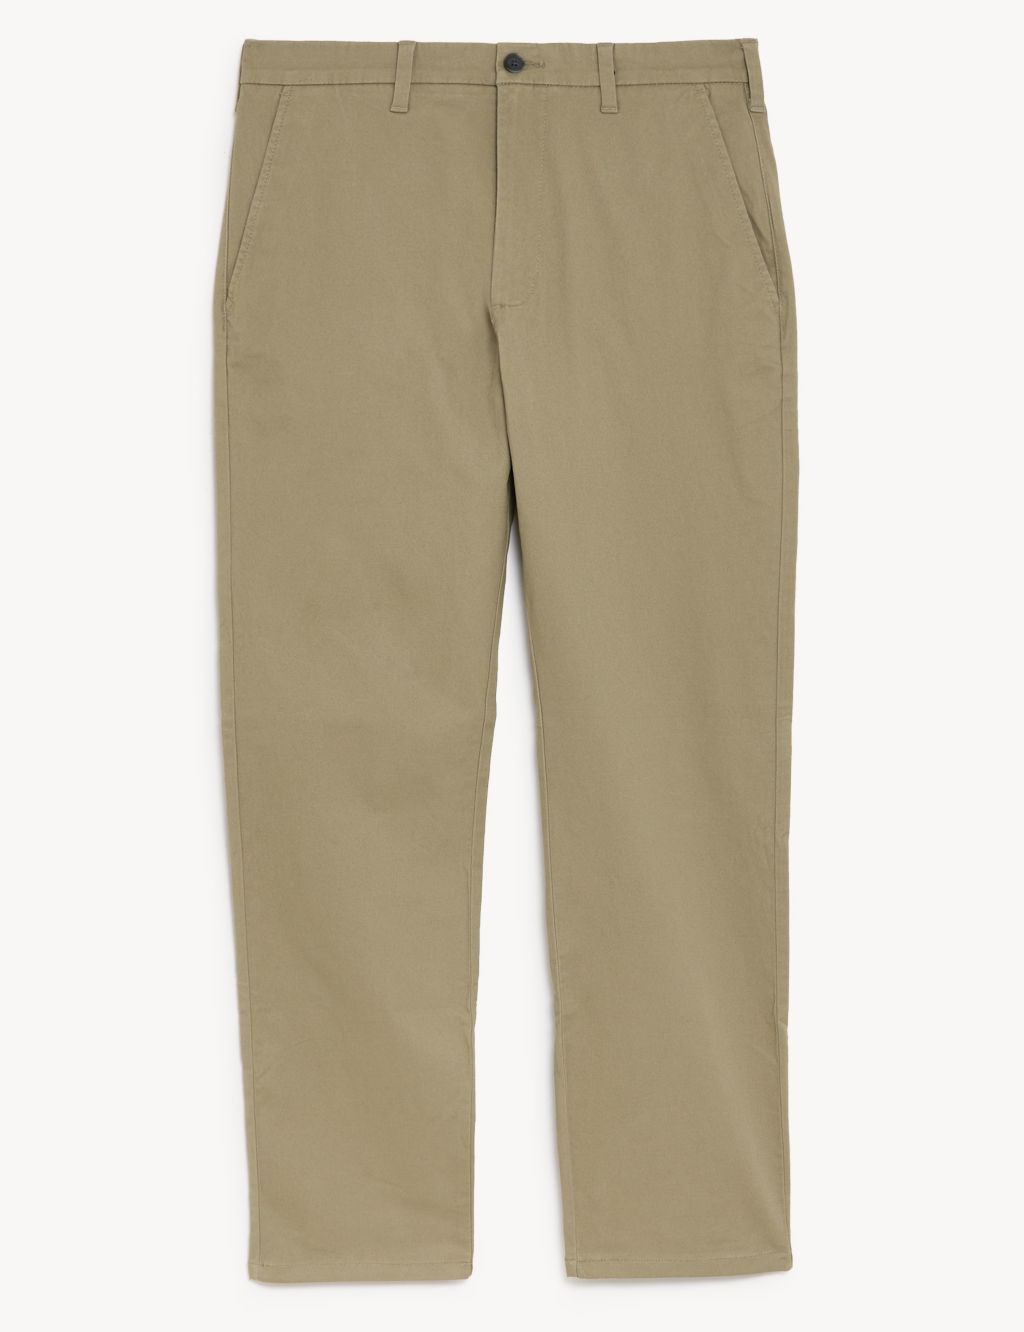 Loose Fit Stretch Chinos image 1